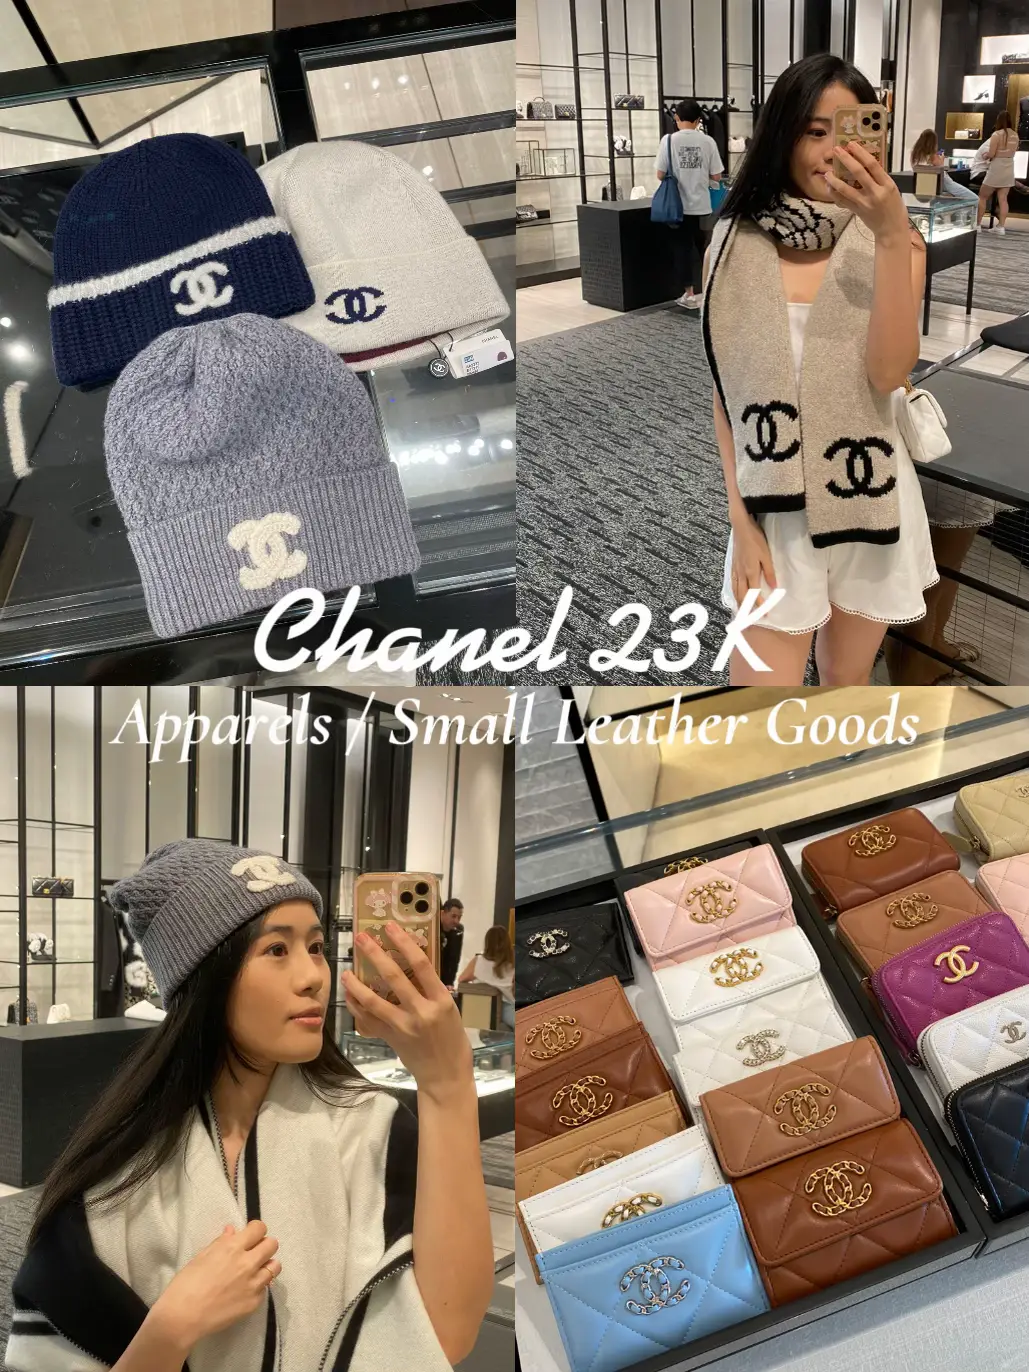 Chanel 23K Tryons✨, Gallery posted by etherealpeonies